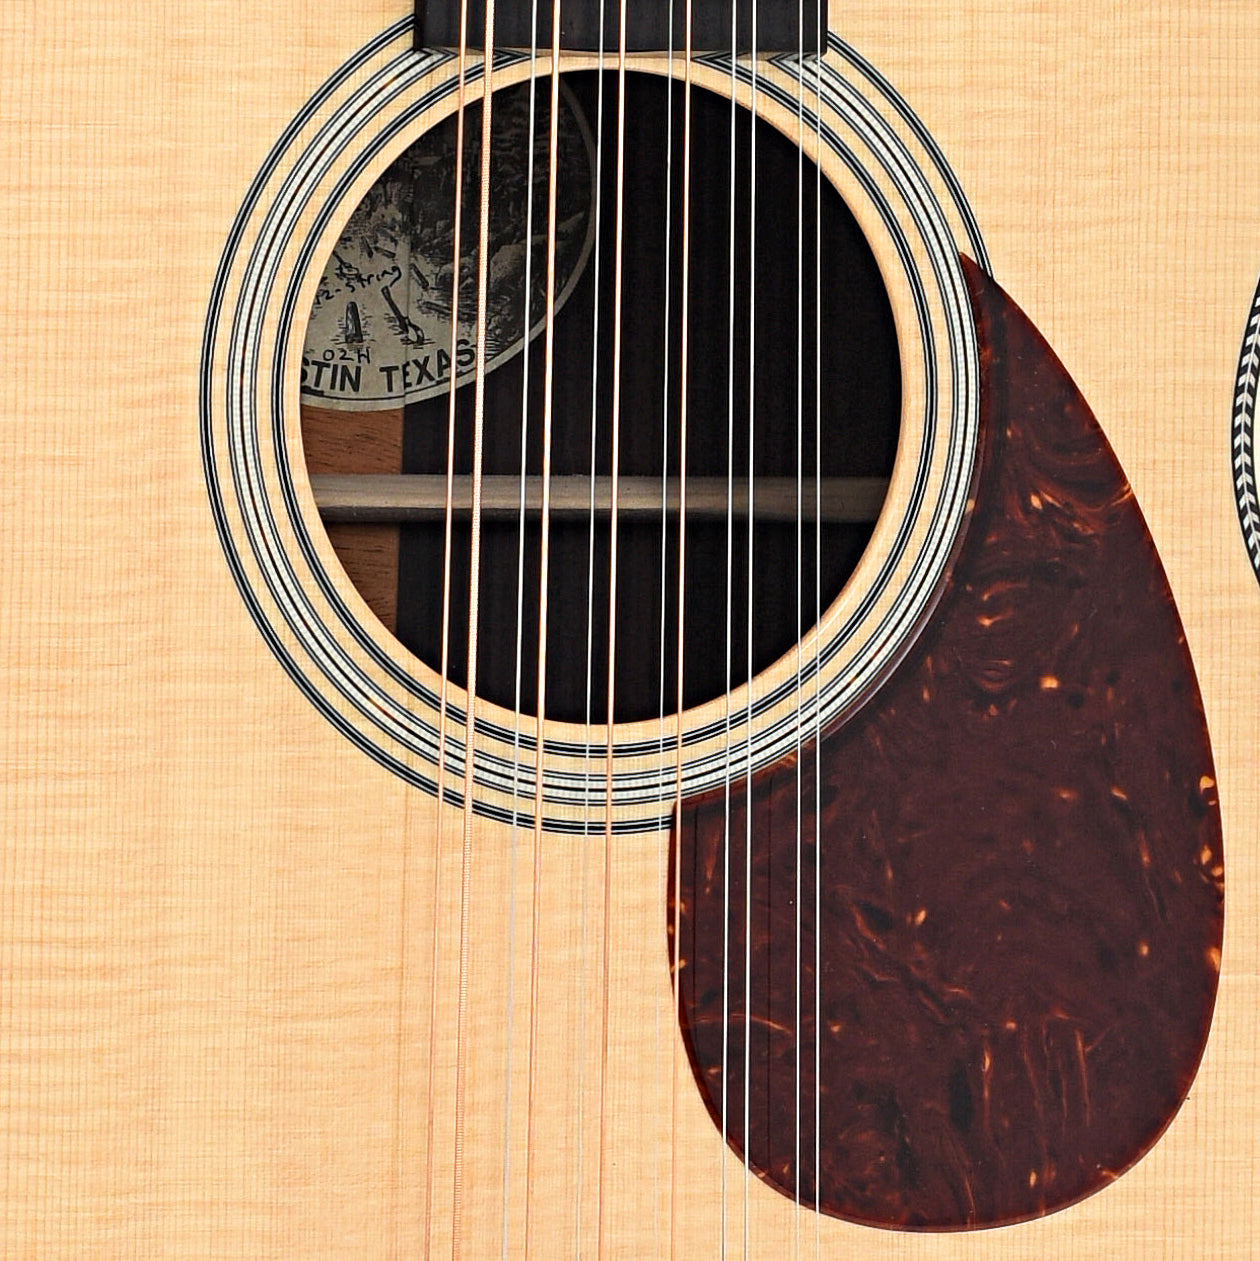 Soundhole and Pickguard of Collings 02H 12-String Guitar